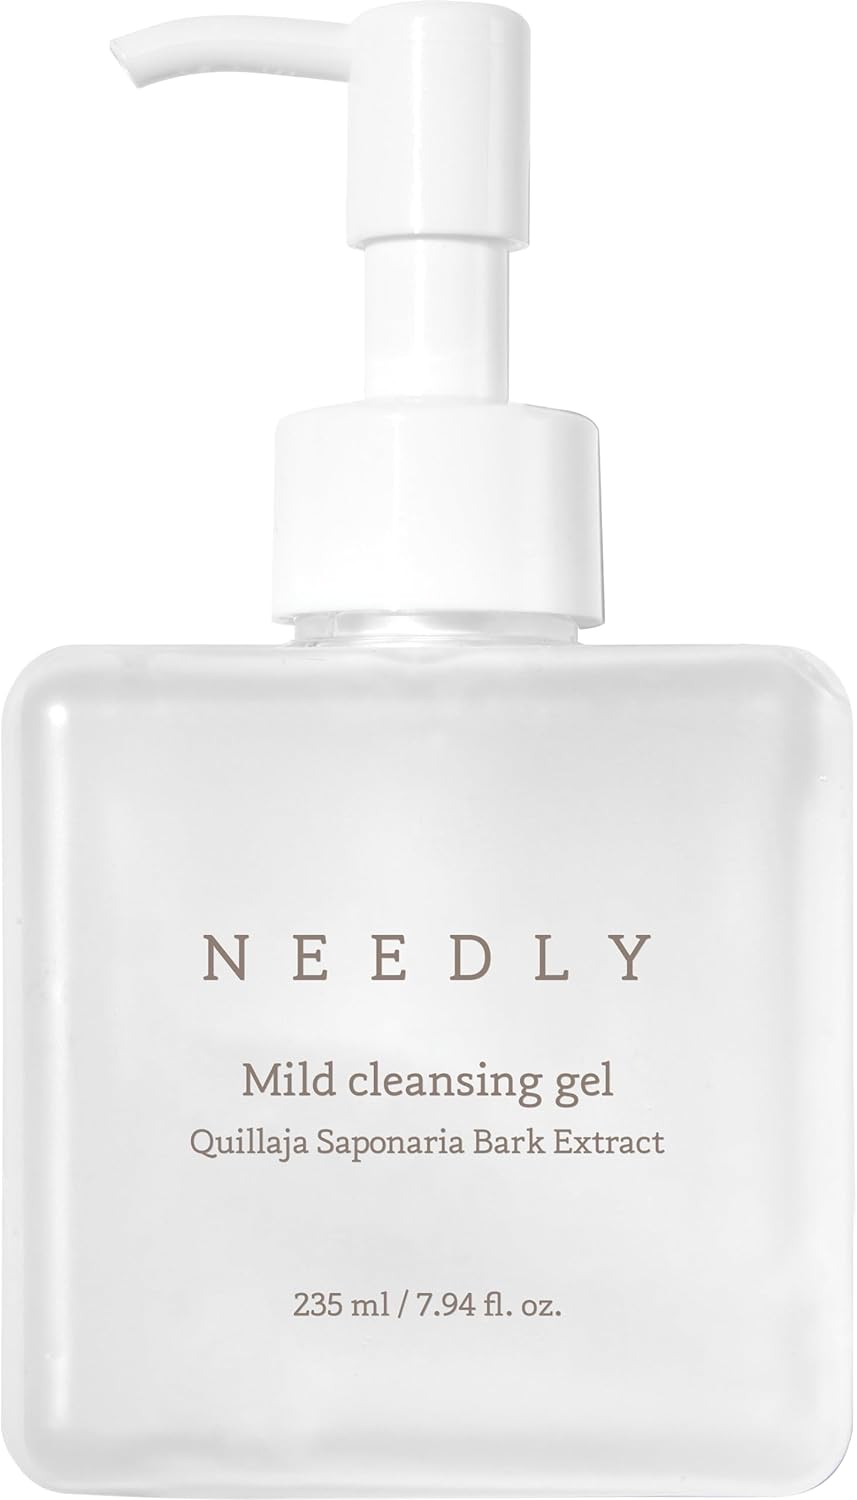 NEEDLY Mild Cleansing Balm, Gel, Oil 3Type